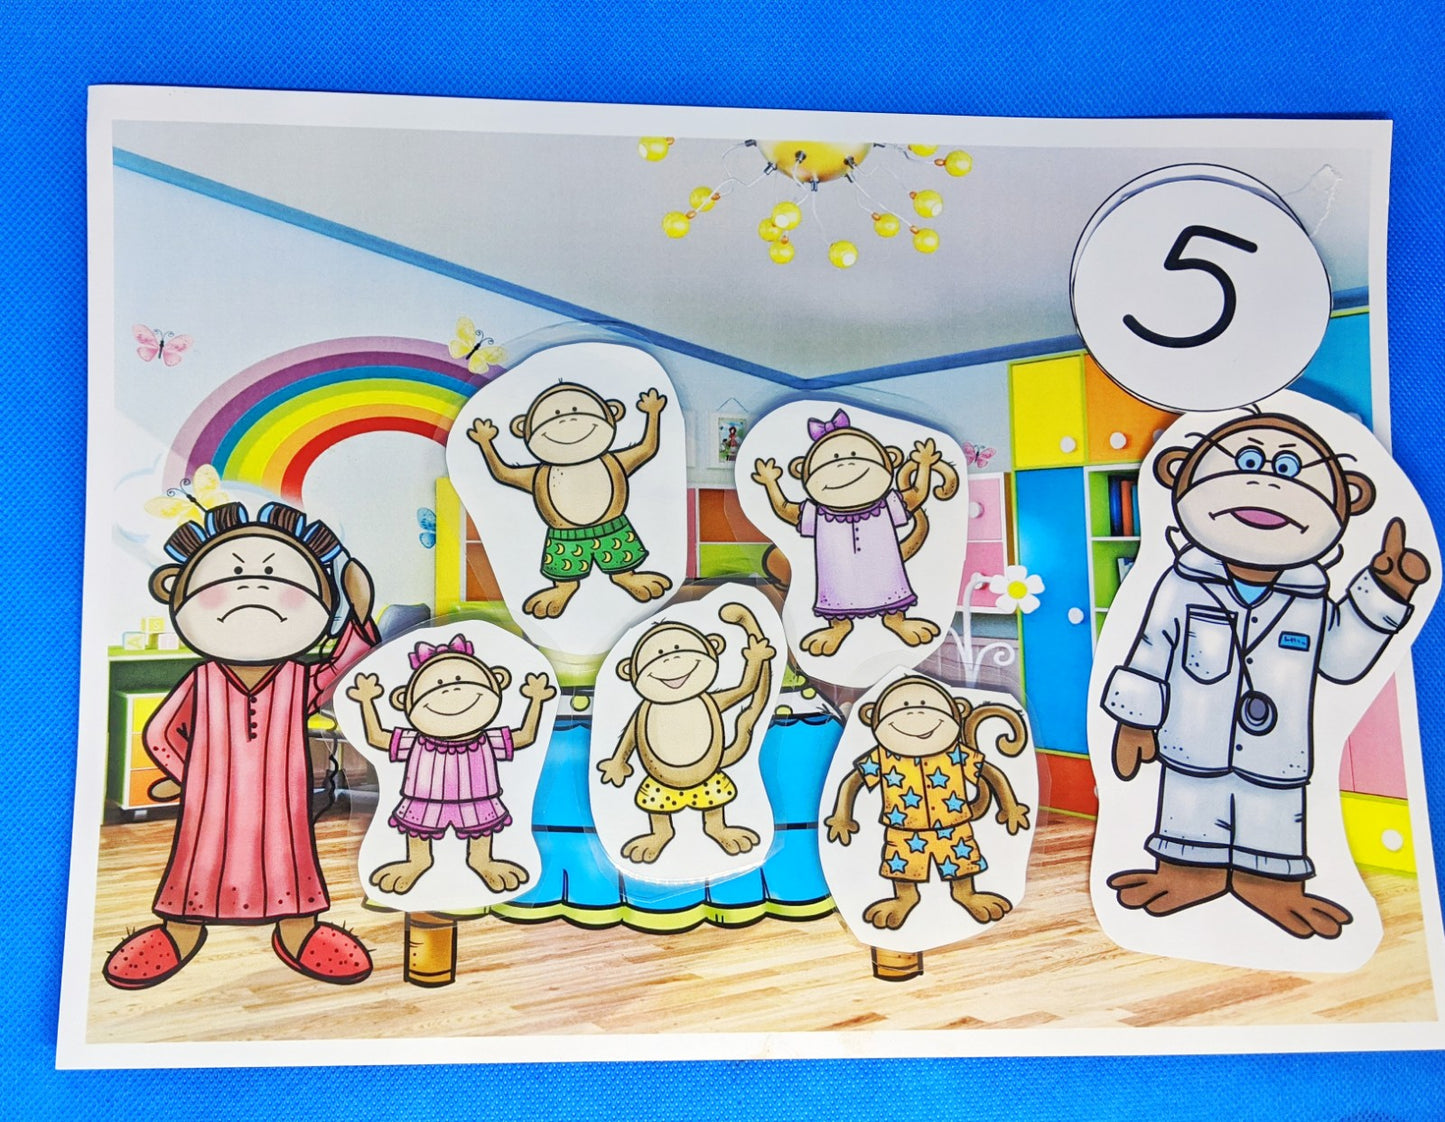 Five Little Monkeys Numbers Game Use this fun game to demonstrate the 5 little monkeys song. Use the scene and the monkeys to act out the song and practice counting. Preschool game. Great for teaching counting to prek